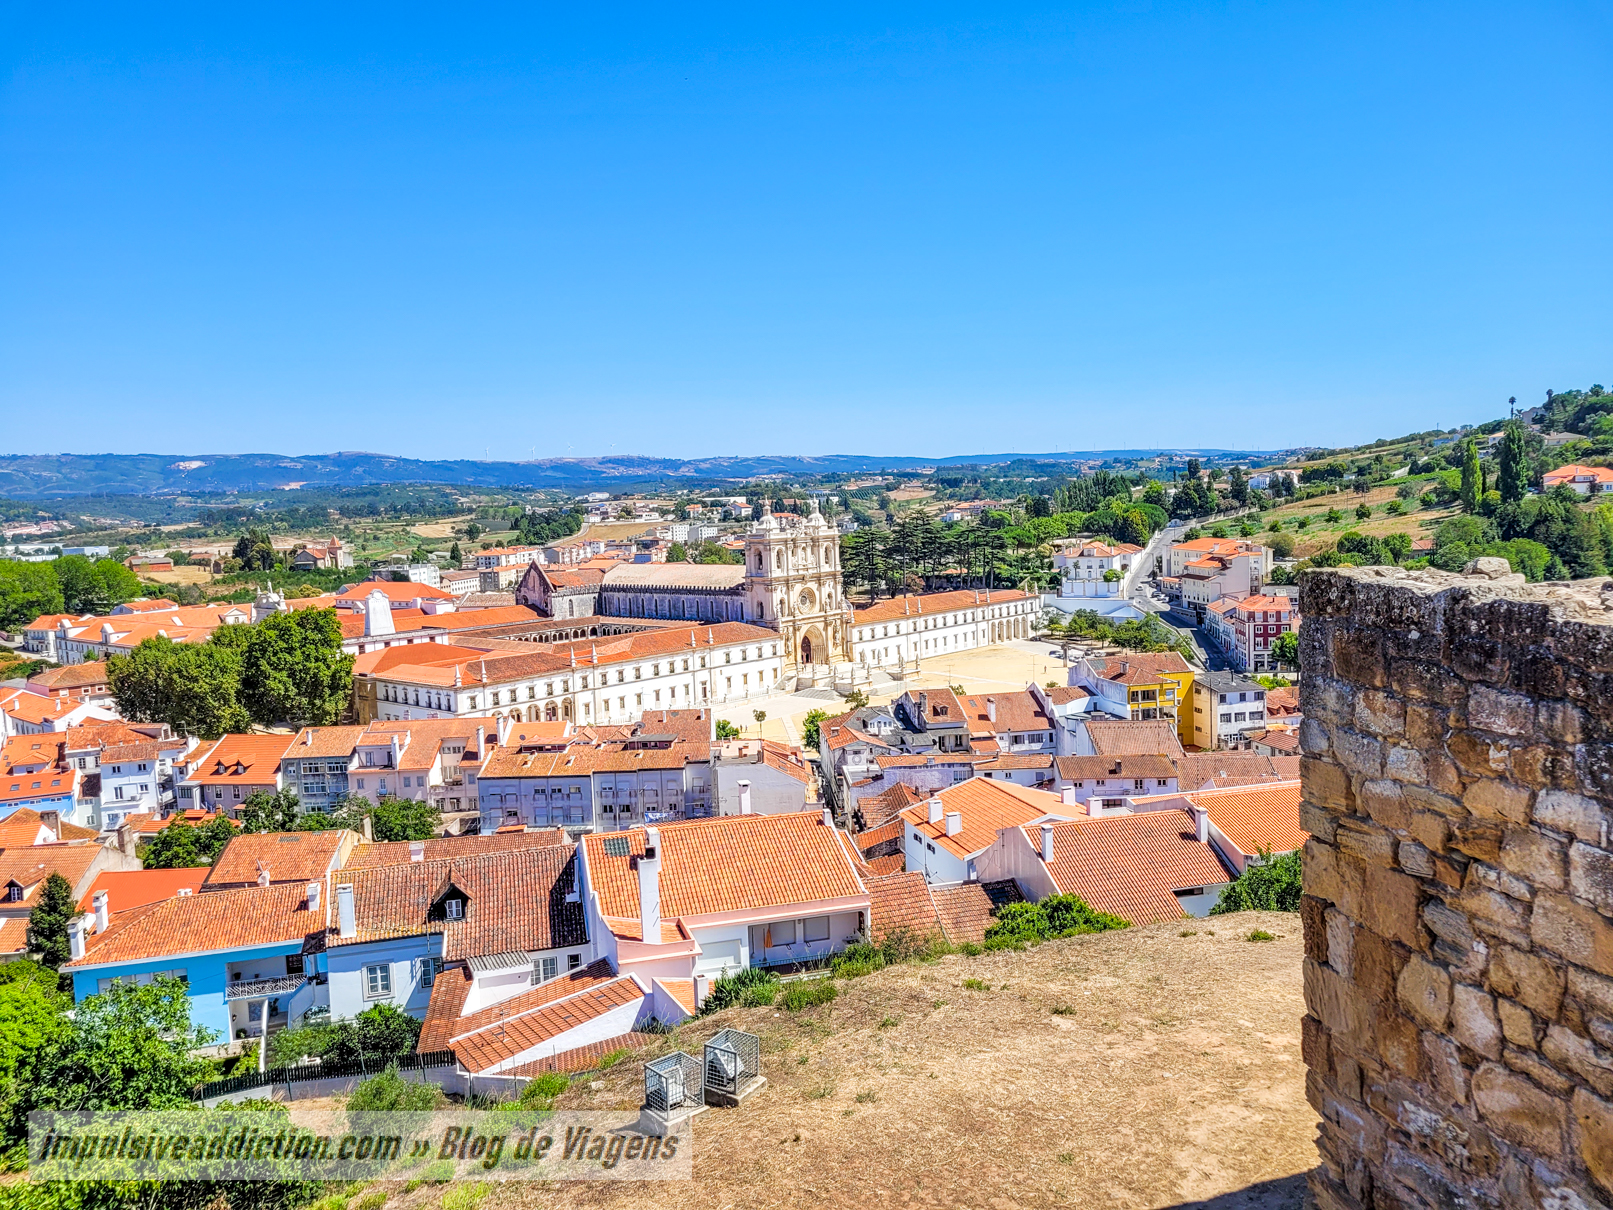 Viewpoint of the Alcobaça Monastery from the castle